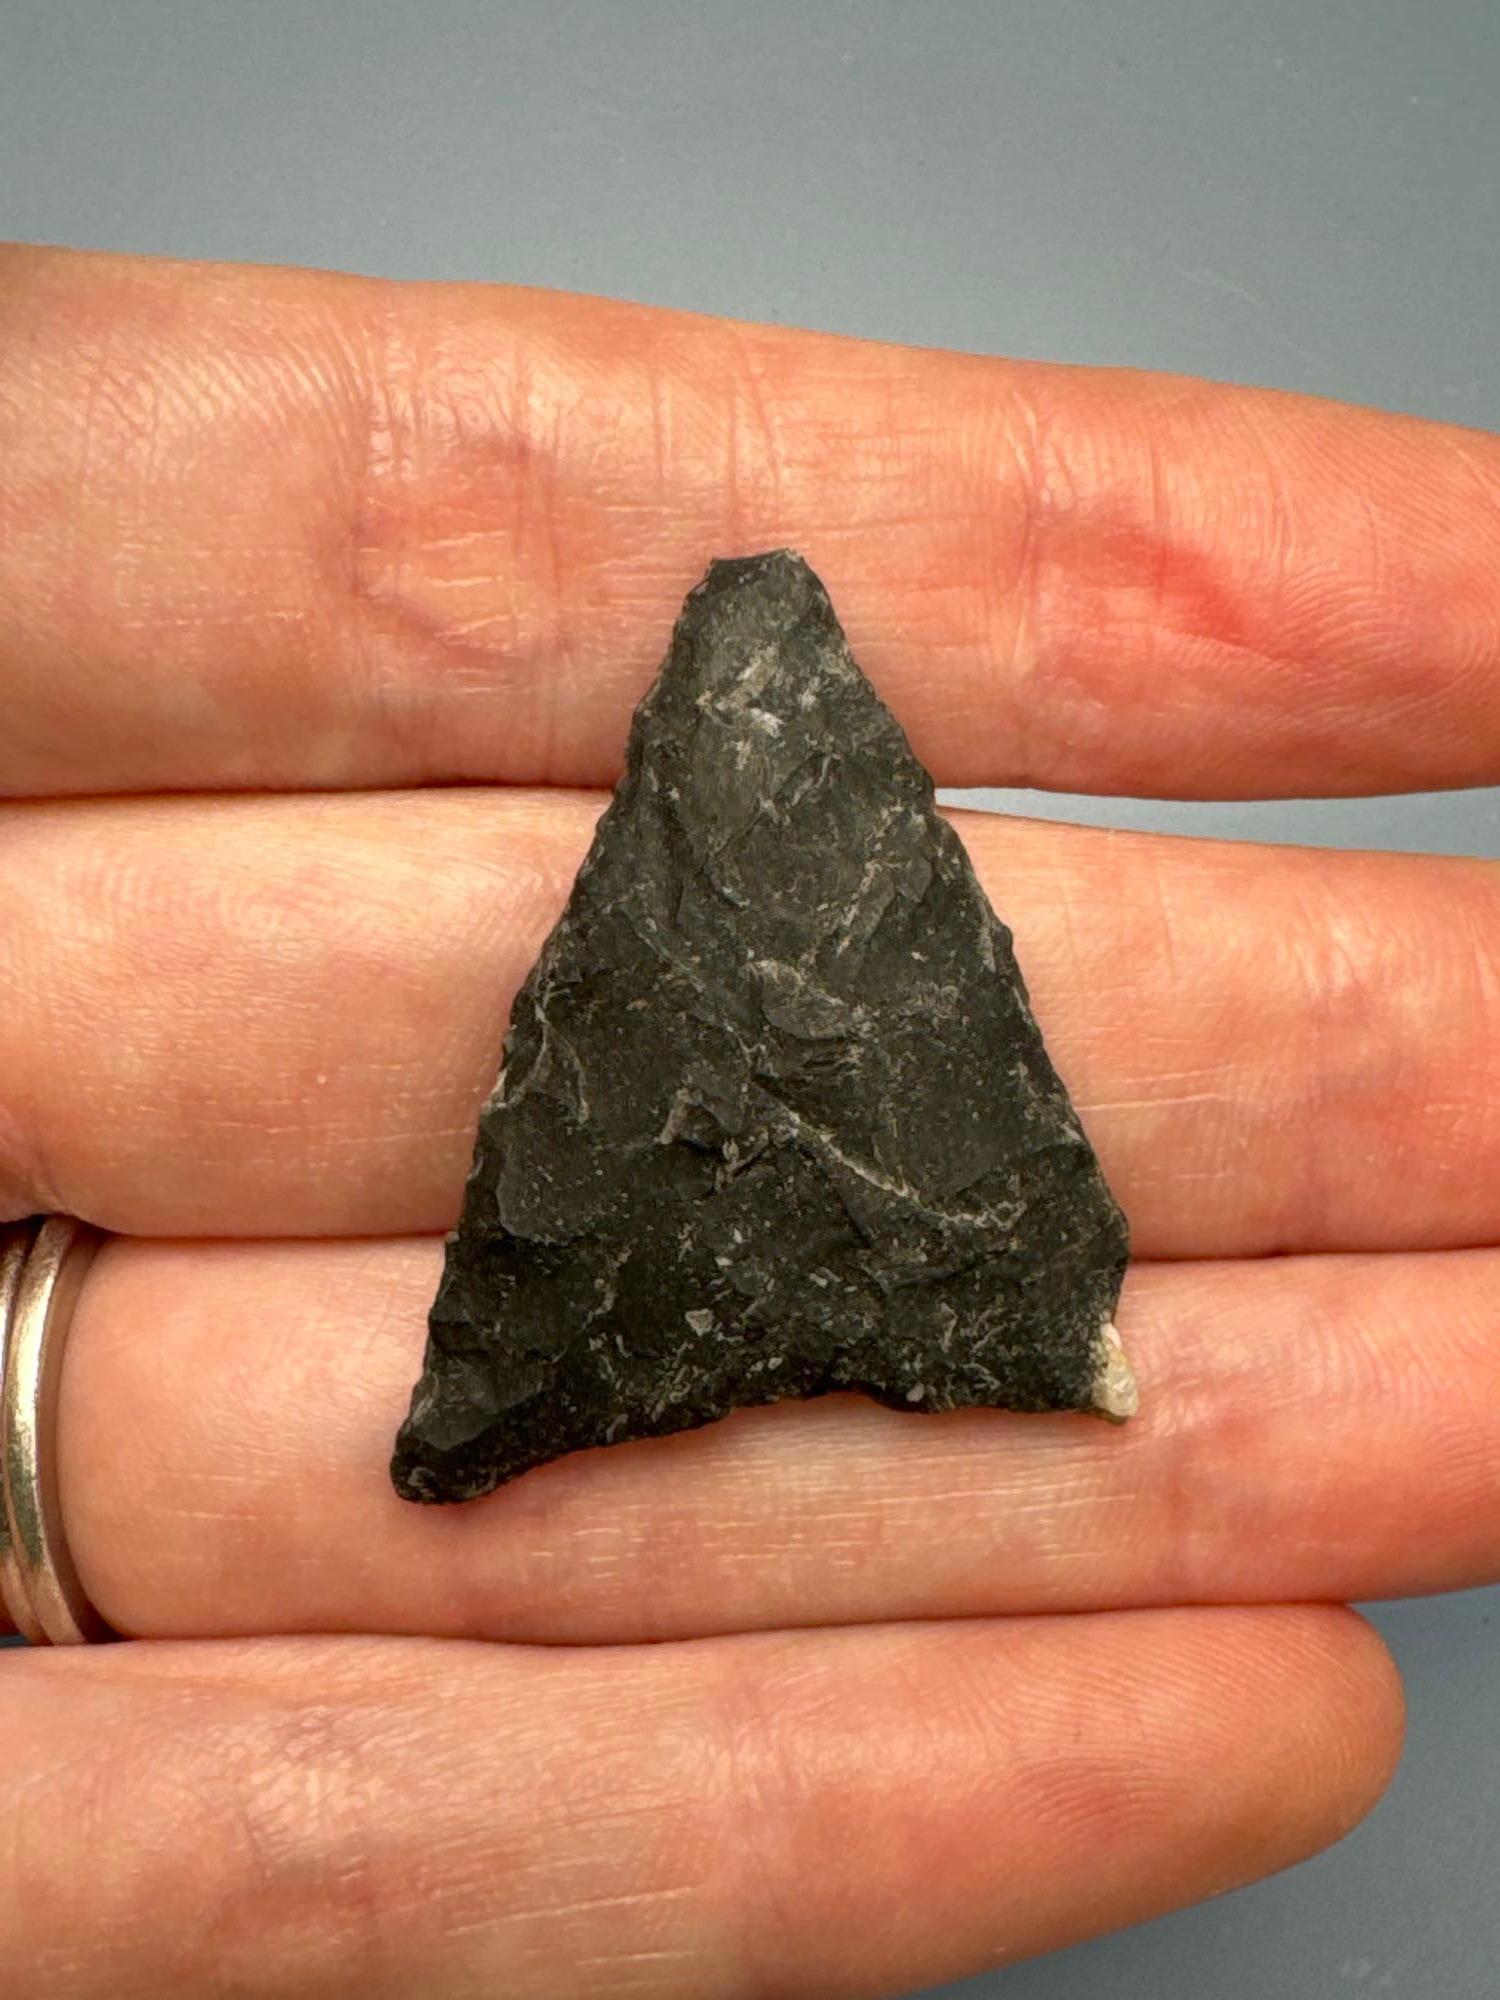 1 3/8" Thin Black Chert Triangle Point, Found in PA/NJ/NY Tristate Area, Ex: Harry Mucklin, Lemaster